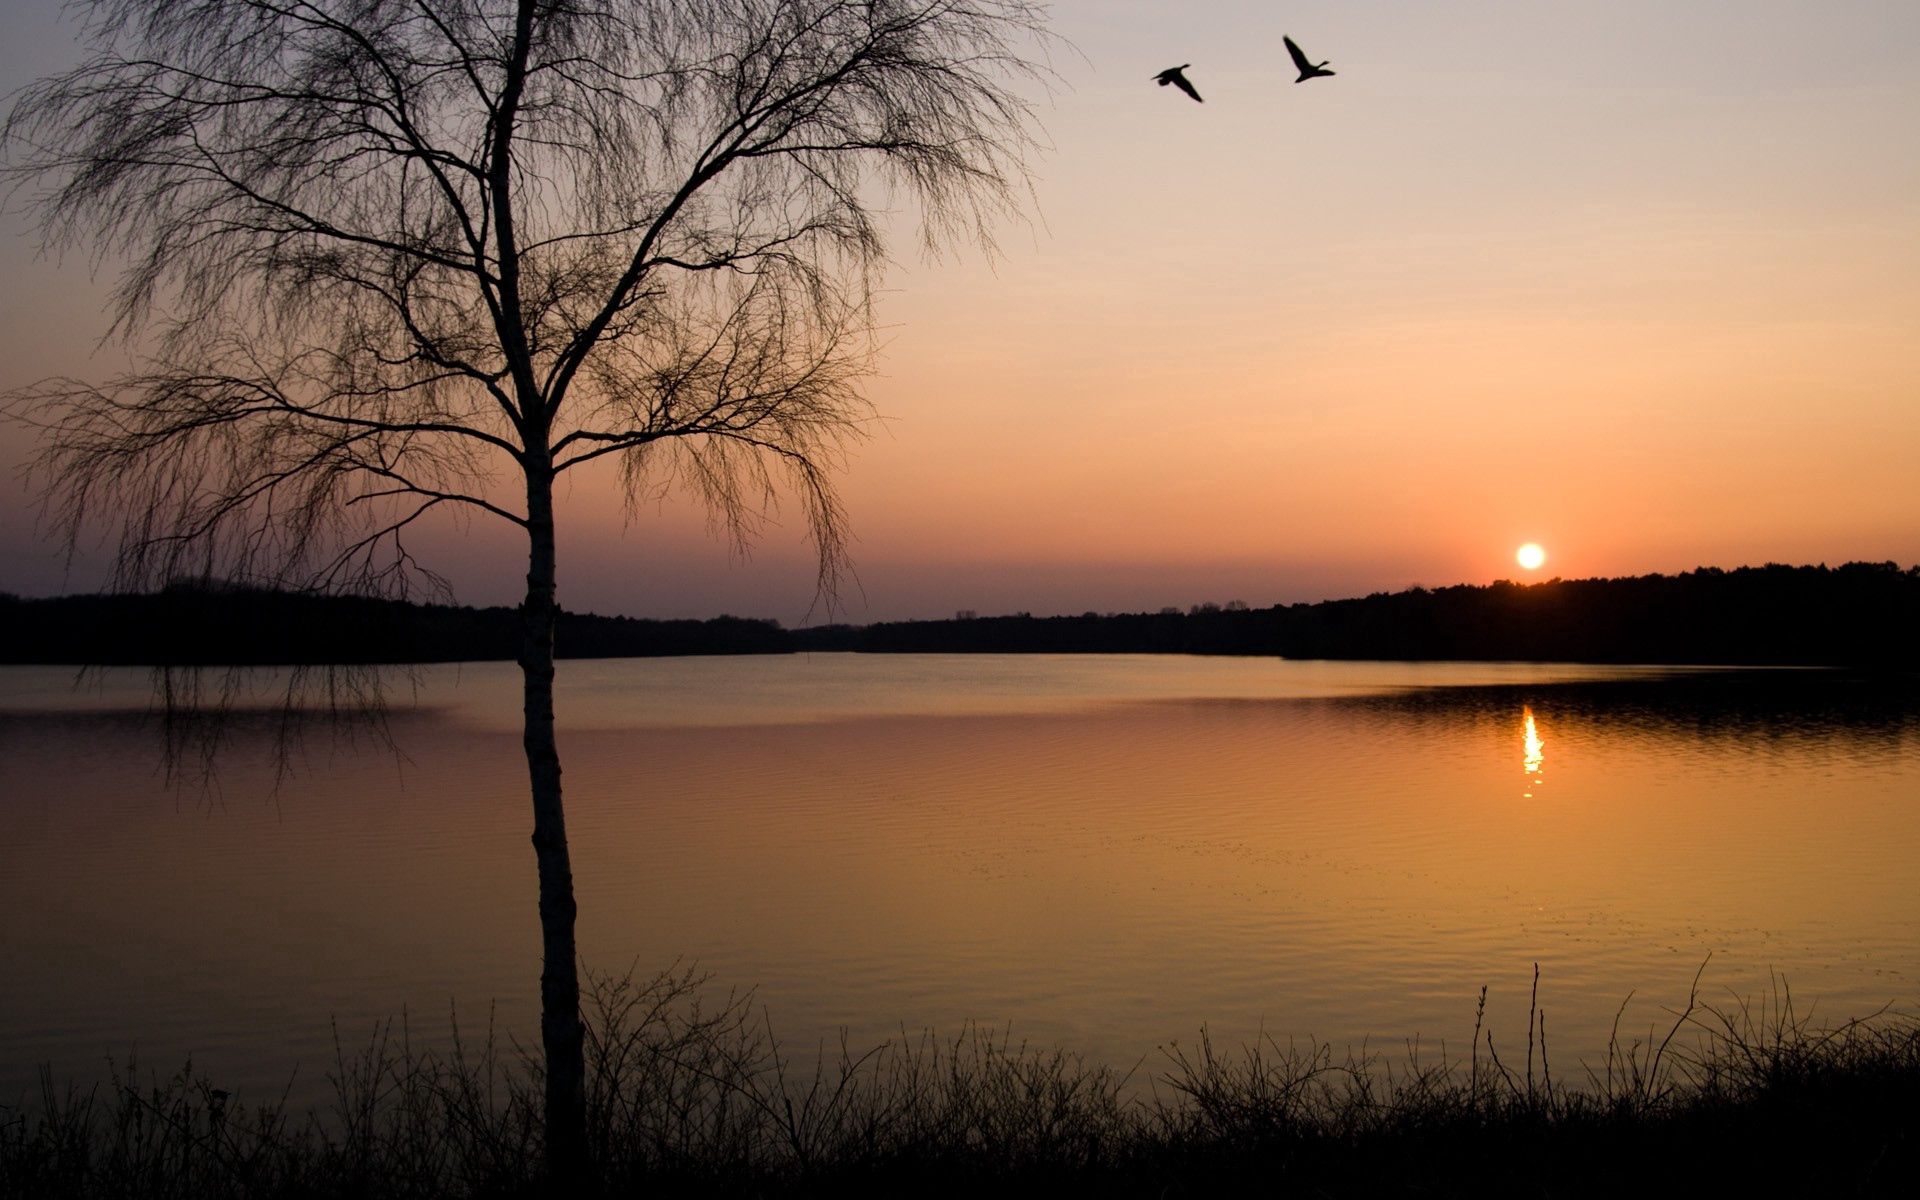 branches, nature, sunset, lake, shore, bank, branch, birch